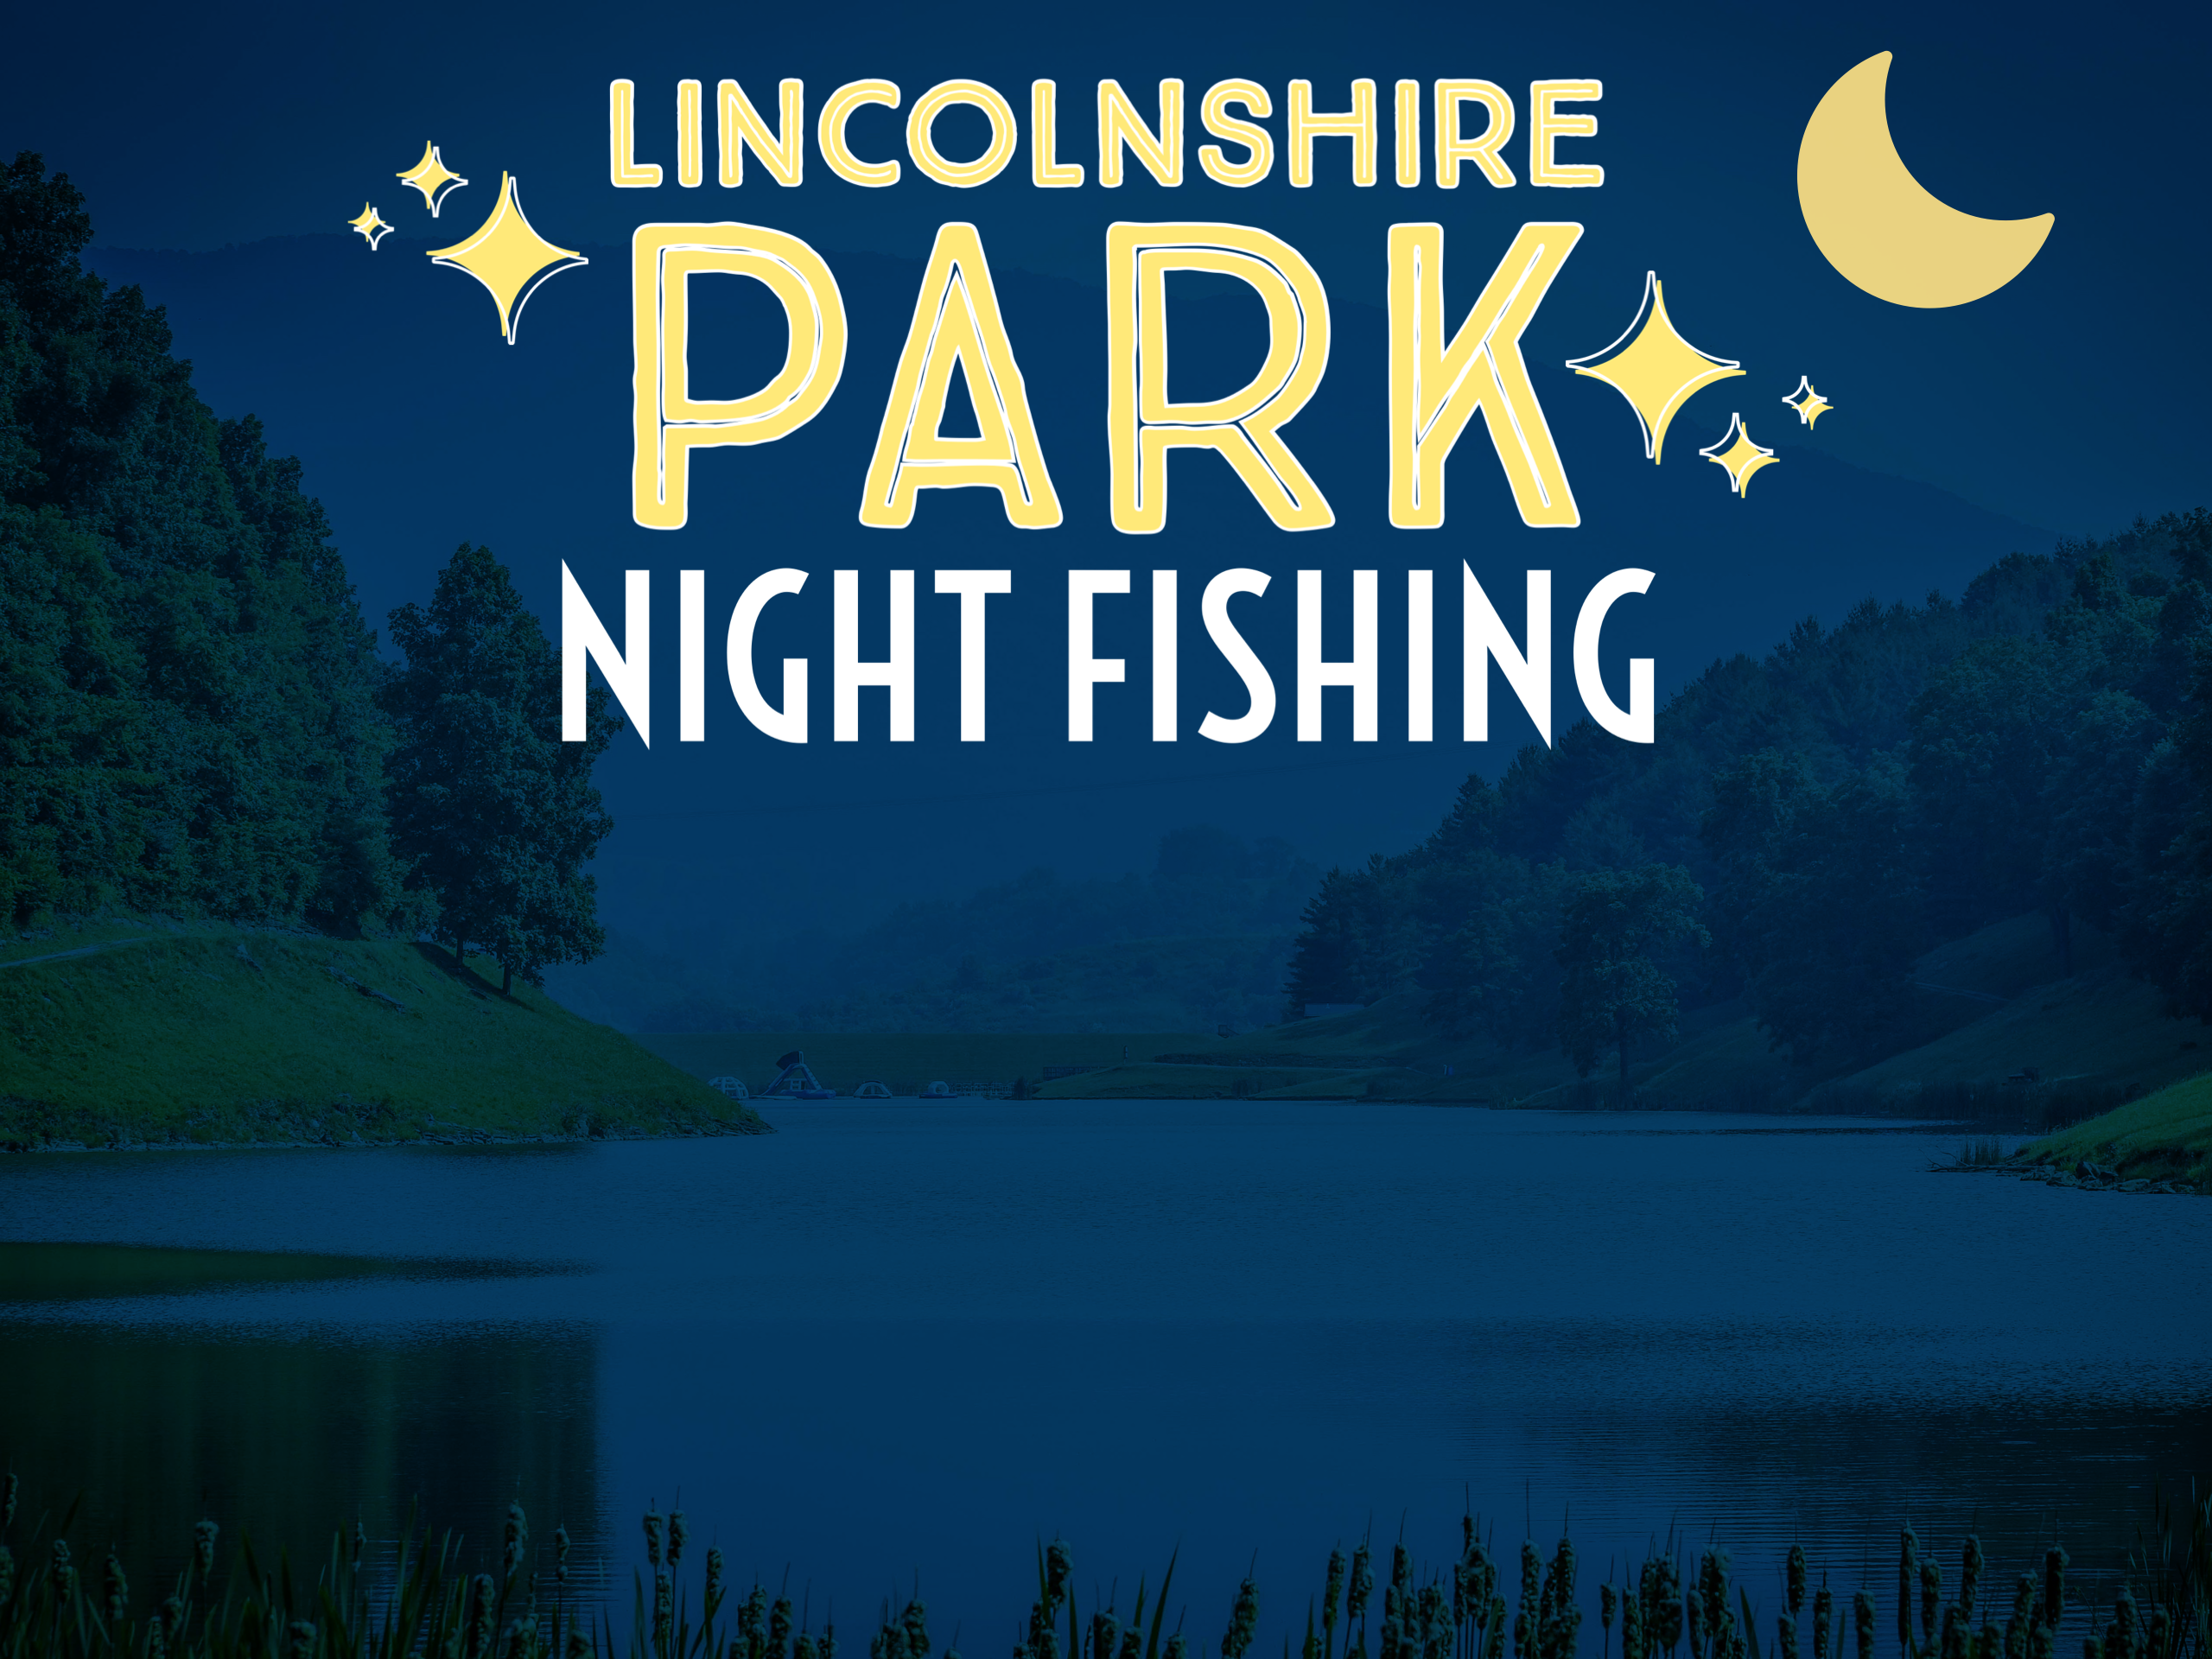 Night Fishing Dates Announced for Lincolnshire Park